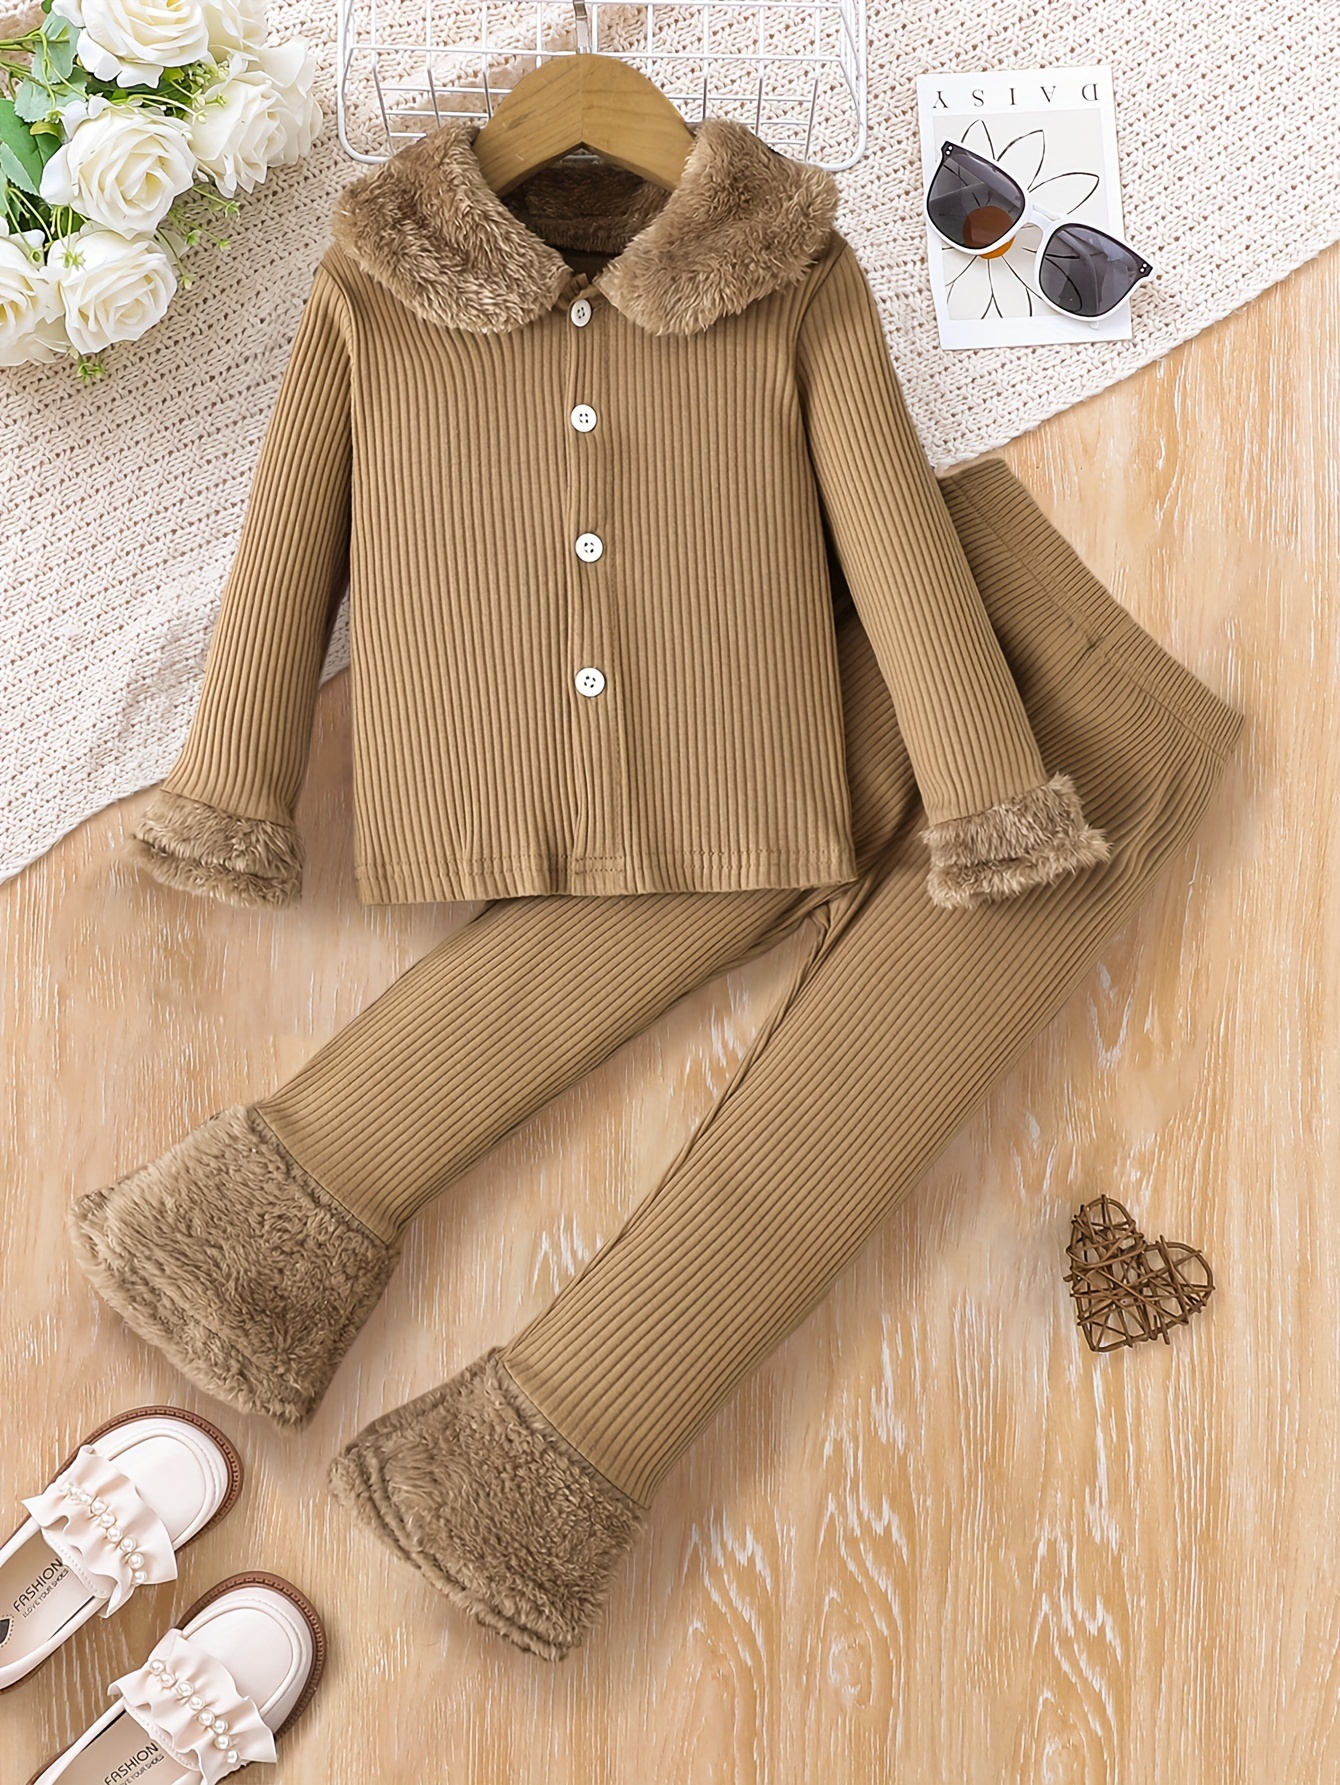 Winter Girls Clothing Sets, Winter Outfits Girls